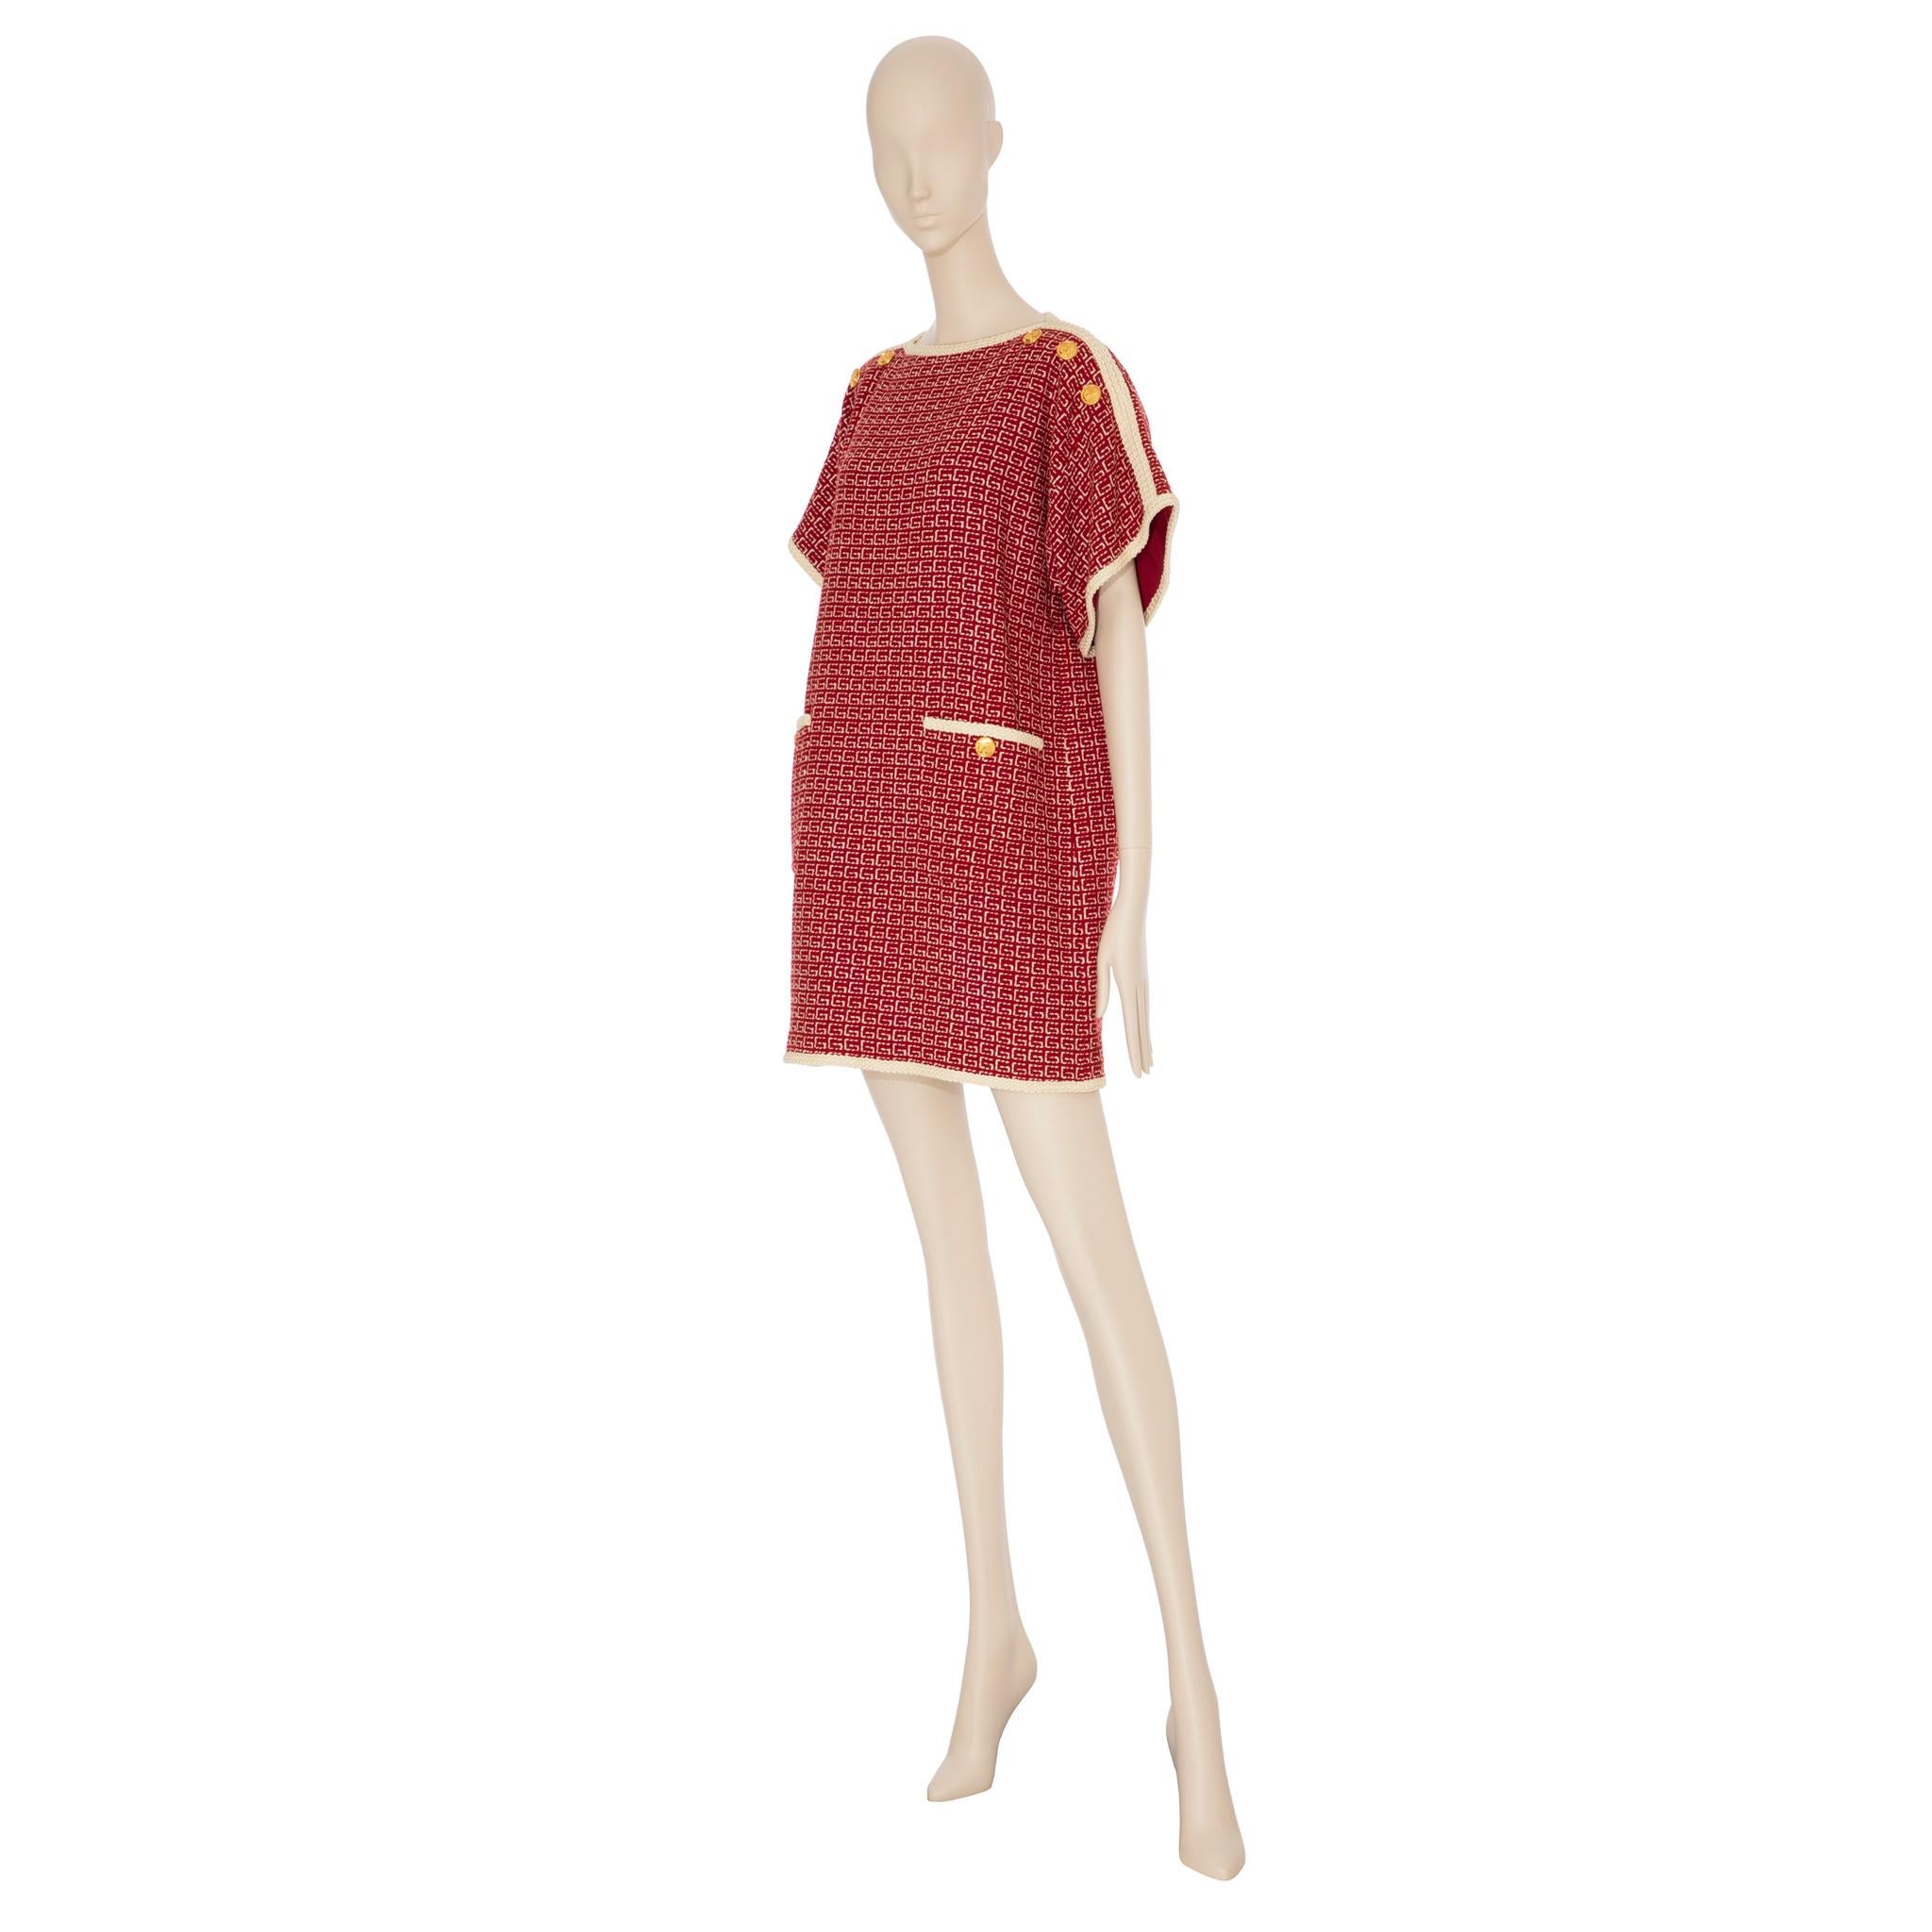 Gucci Tweed Red & Off-White Tunic Dress 38 IT For Sale 1